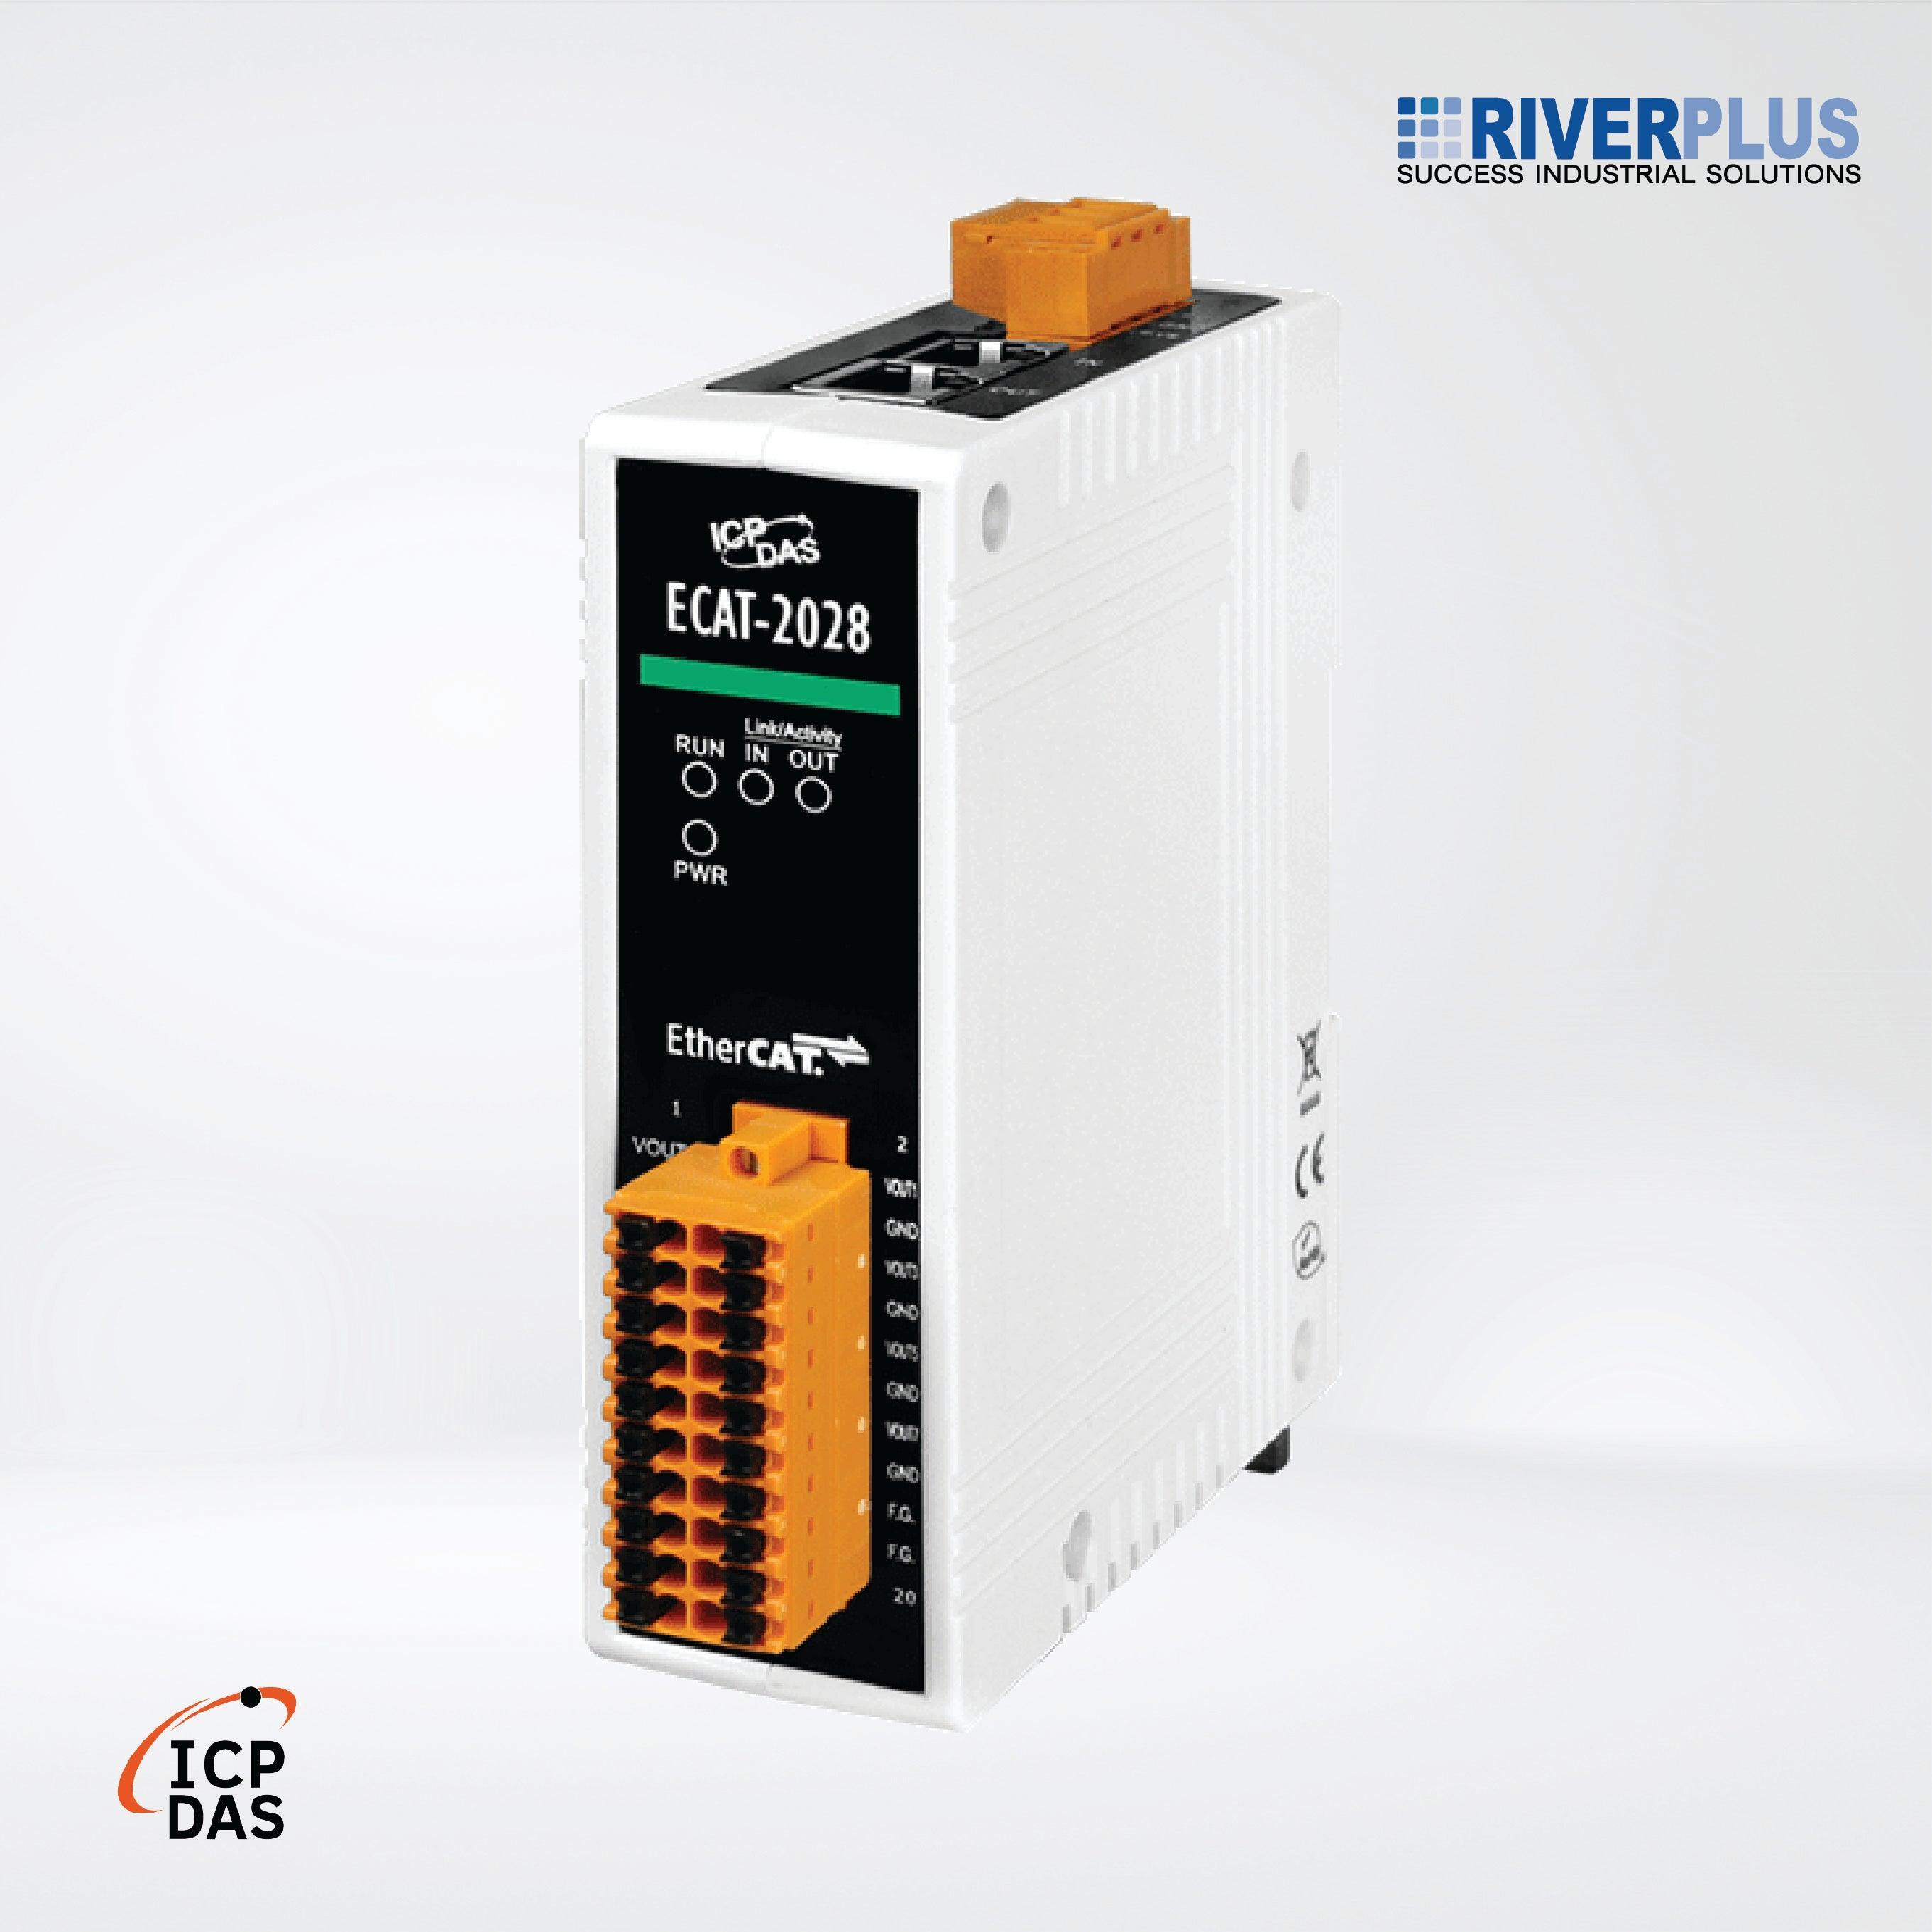 ECAT-2028 EtherCAT Slave I/O Module with Isolated 8-ch AO - Riverplus